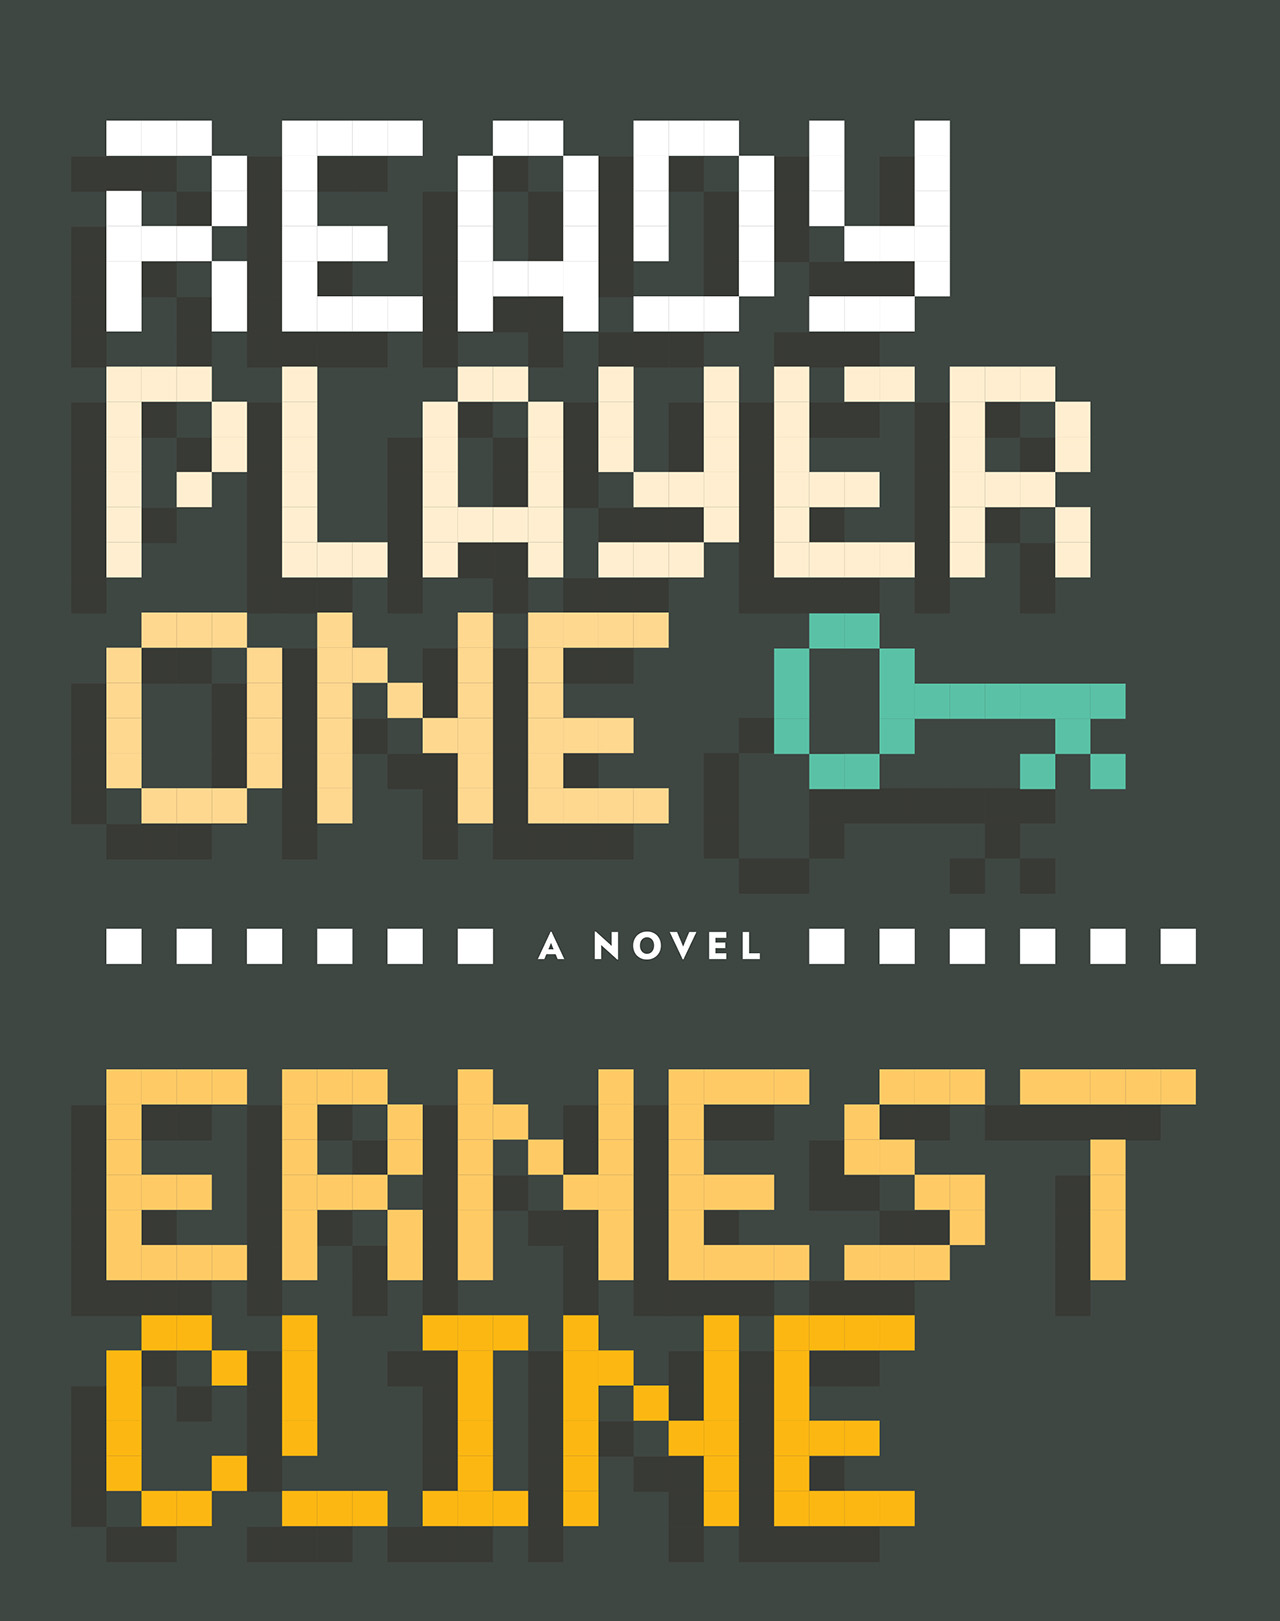 Jacob Parr | "Ready Player One" by Ernest Cline